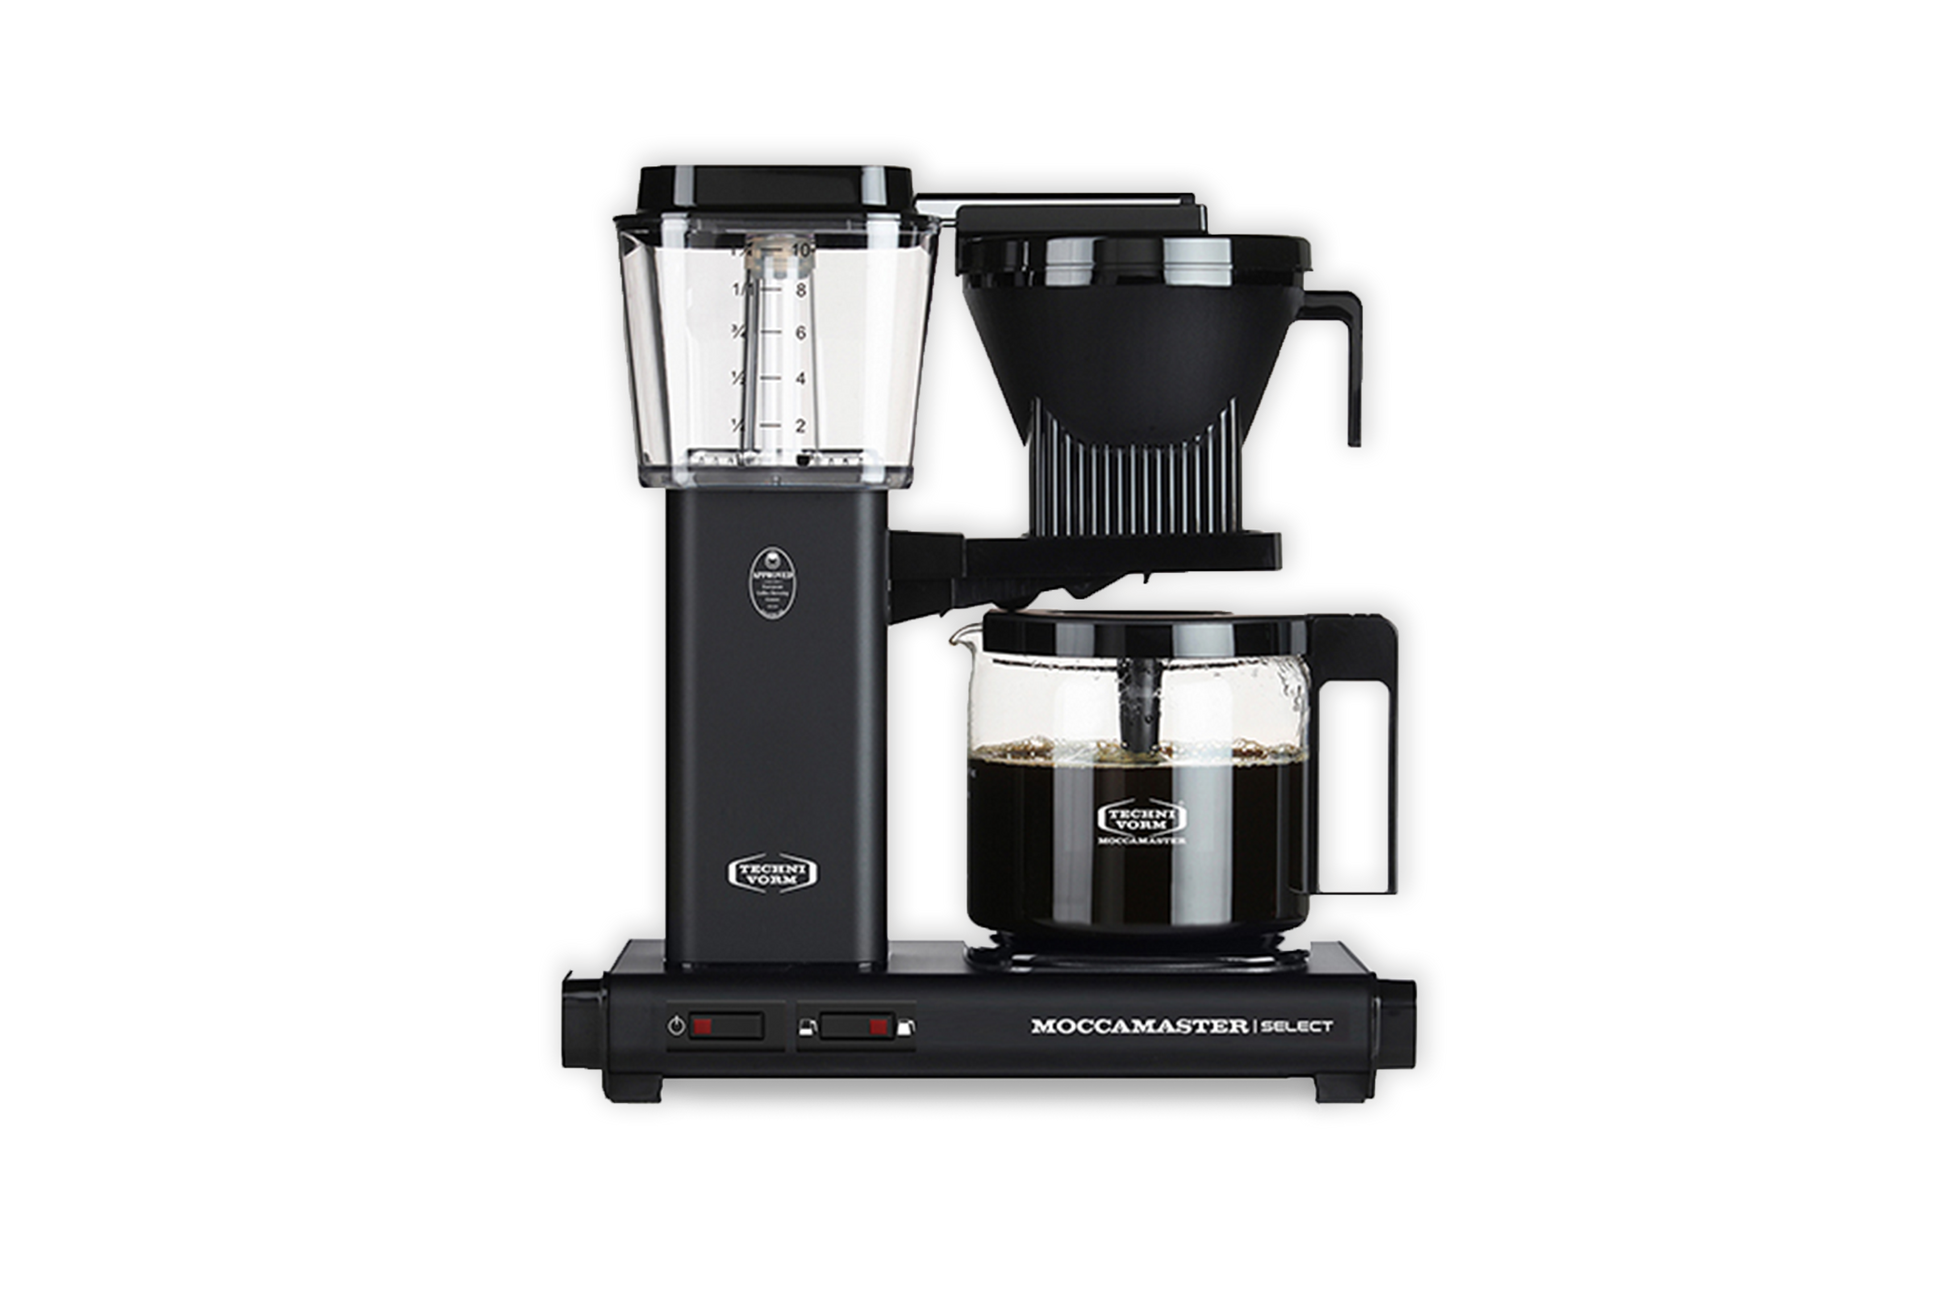 With the ability to adjust for smaller or larger brews, MoccaMaster's latest model – the Select – allows you to alter water flow rate at the touch of a button.